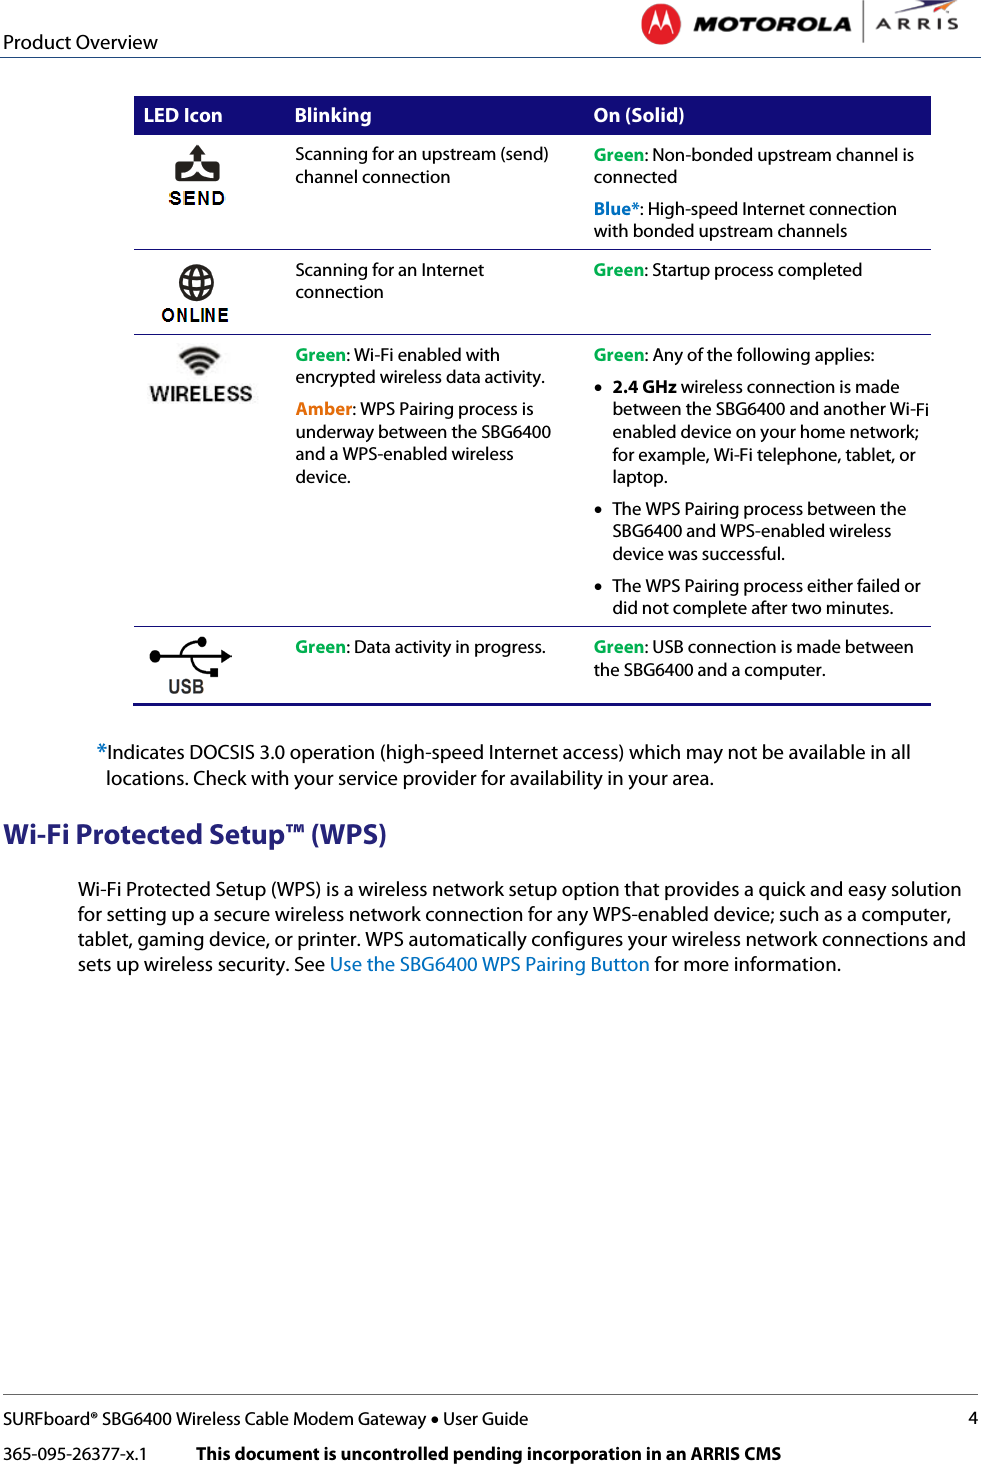 Product Overview   SURFboard® SBG6400 Wireless Cable Modem Gateway • User Guide 4 365-095-26377-x.1            This document is uncontrolled pending incorporation in an ARRIS CMS  LED Icon  Blinking On (Solid)  Scanning for an upstream (send) channel connection Green: Non-bonded upstream channel is connected Blue*: High-speed Internet connection with bonded upstream channels  Scanning for an Internet connection  Green: Startup process completed   Green: Wi-Fi enabled with encrypted wireless data activity.  Amber: WPS Pairing process is underway between the SBG6400 and a WPS-enabled wireless device. Green: Any of the following applies: • 2.4 GHz wireless connection is made between the SBG6400 and another Wi-Fi enabled device on your home network; for example, Wi-Fi telephone, tablet, or laptop. • The WPS Pairing process between the SBG6400 and WPS-enabled wireless device was successful. • The WPS Pairing process either failed or did not complete after two minutes.  Green: Data activity in progress. Green: USB connection is made between the SBG6400 and a computer.  *Indicates DOCSIS 3.0 operation (high-speed Internet access) which may not be available in all locations. Check with your service provider for availability in your area. Wi-Fi Protected Setup™ (WPS) Wi-Fi Protected Setup (WPS) is a wireless network setup option that provides a quick and easy solution for setting up a secure wireless network connection for any WPS-enabled device; such as a computer, tablet, gaming device, or printer. WPS automatically configures your wireless network connections and sets up wireless security. See Use the SBG6400 WPS Pairing Button for more information. 